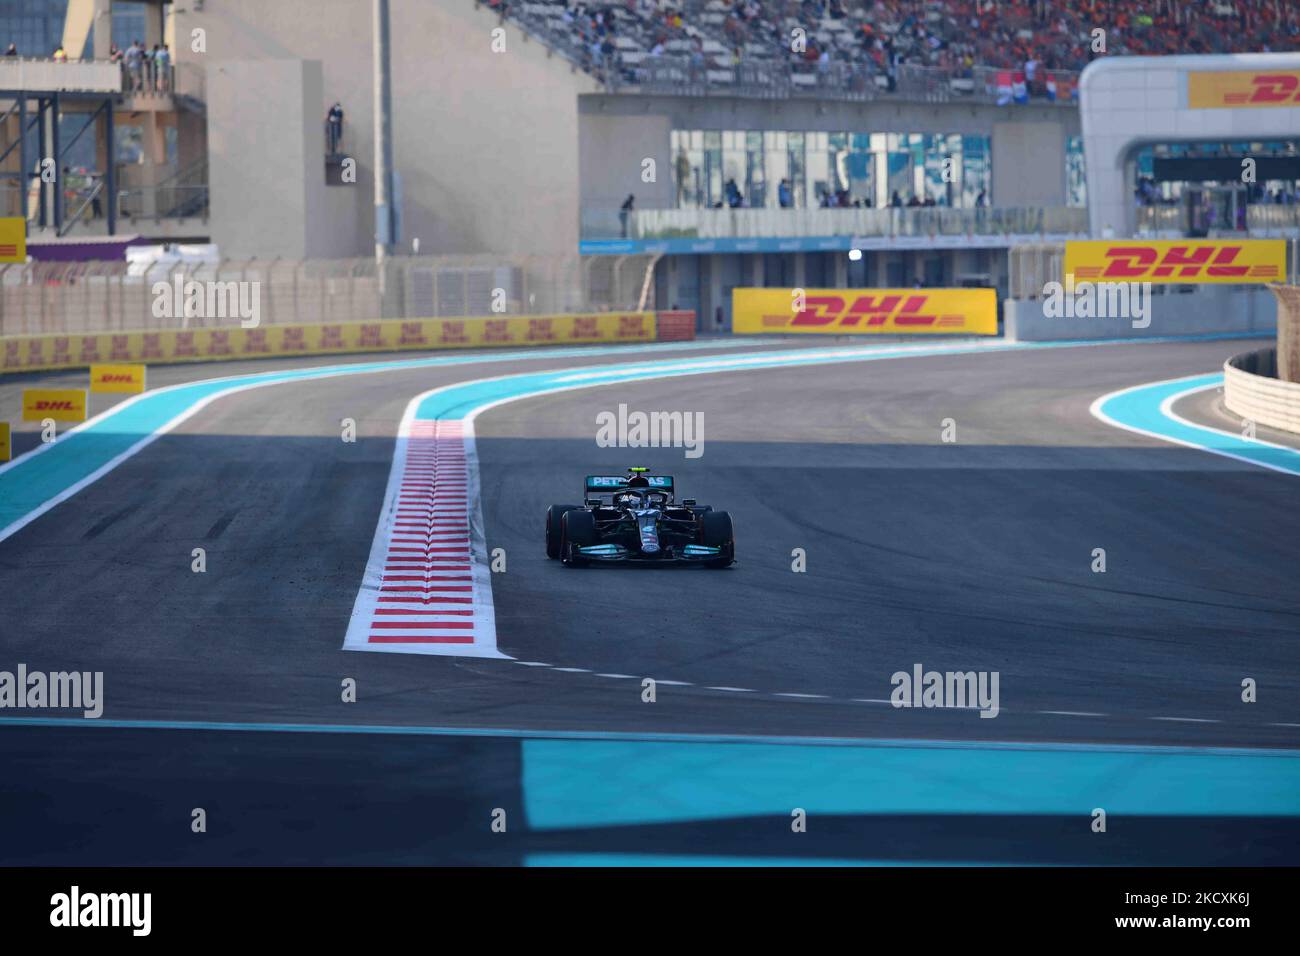 Valtteri Bottas of Mercedes-AMG Petronas F1 Team drive his W12 single-seater during qualifying session of last race of the year in Yes Marina Circuit, Yes Island, Abu Dhabi, Uniter Arab Emirates, 11 December 2021 (Photo by Andrea Diodato/NurPhoto) Stock Photo